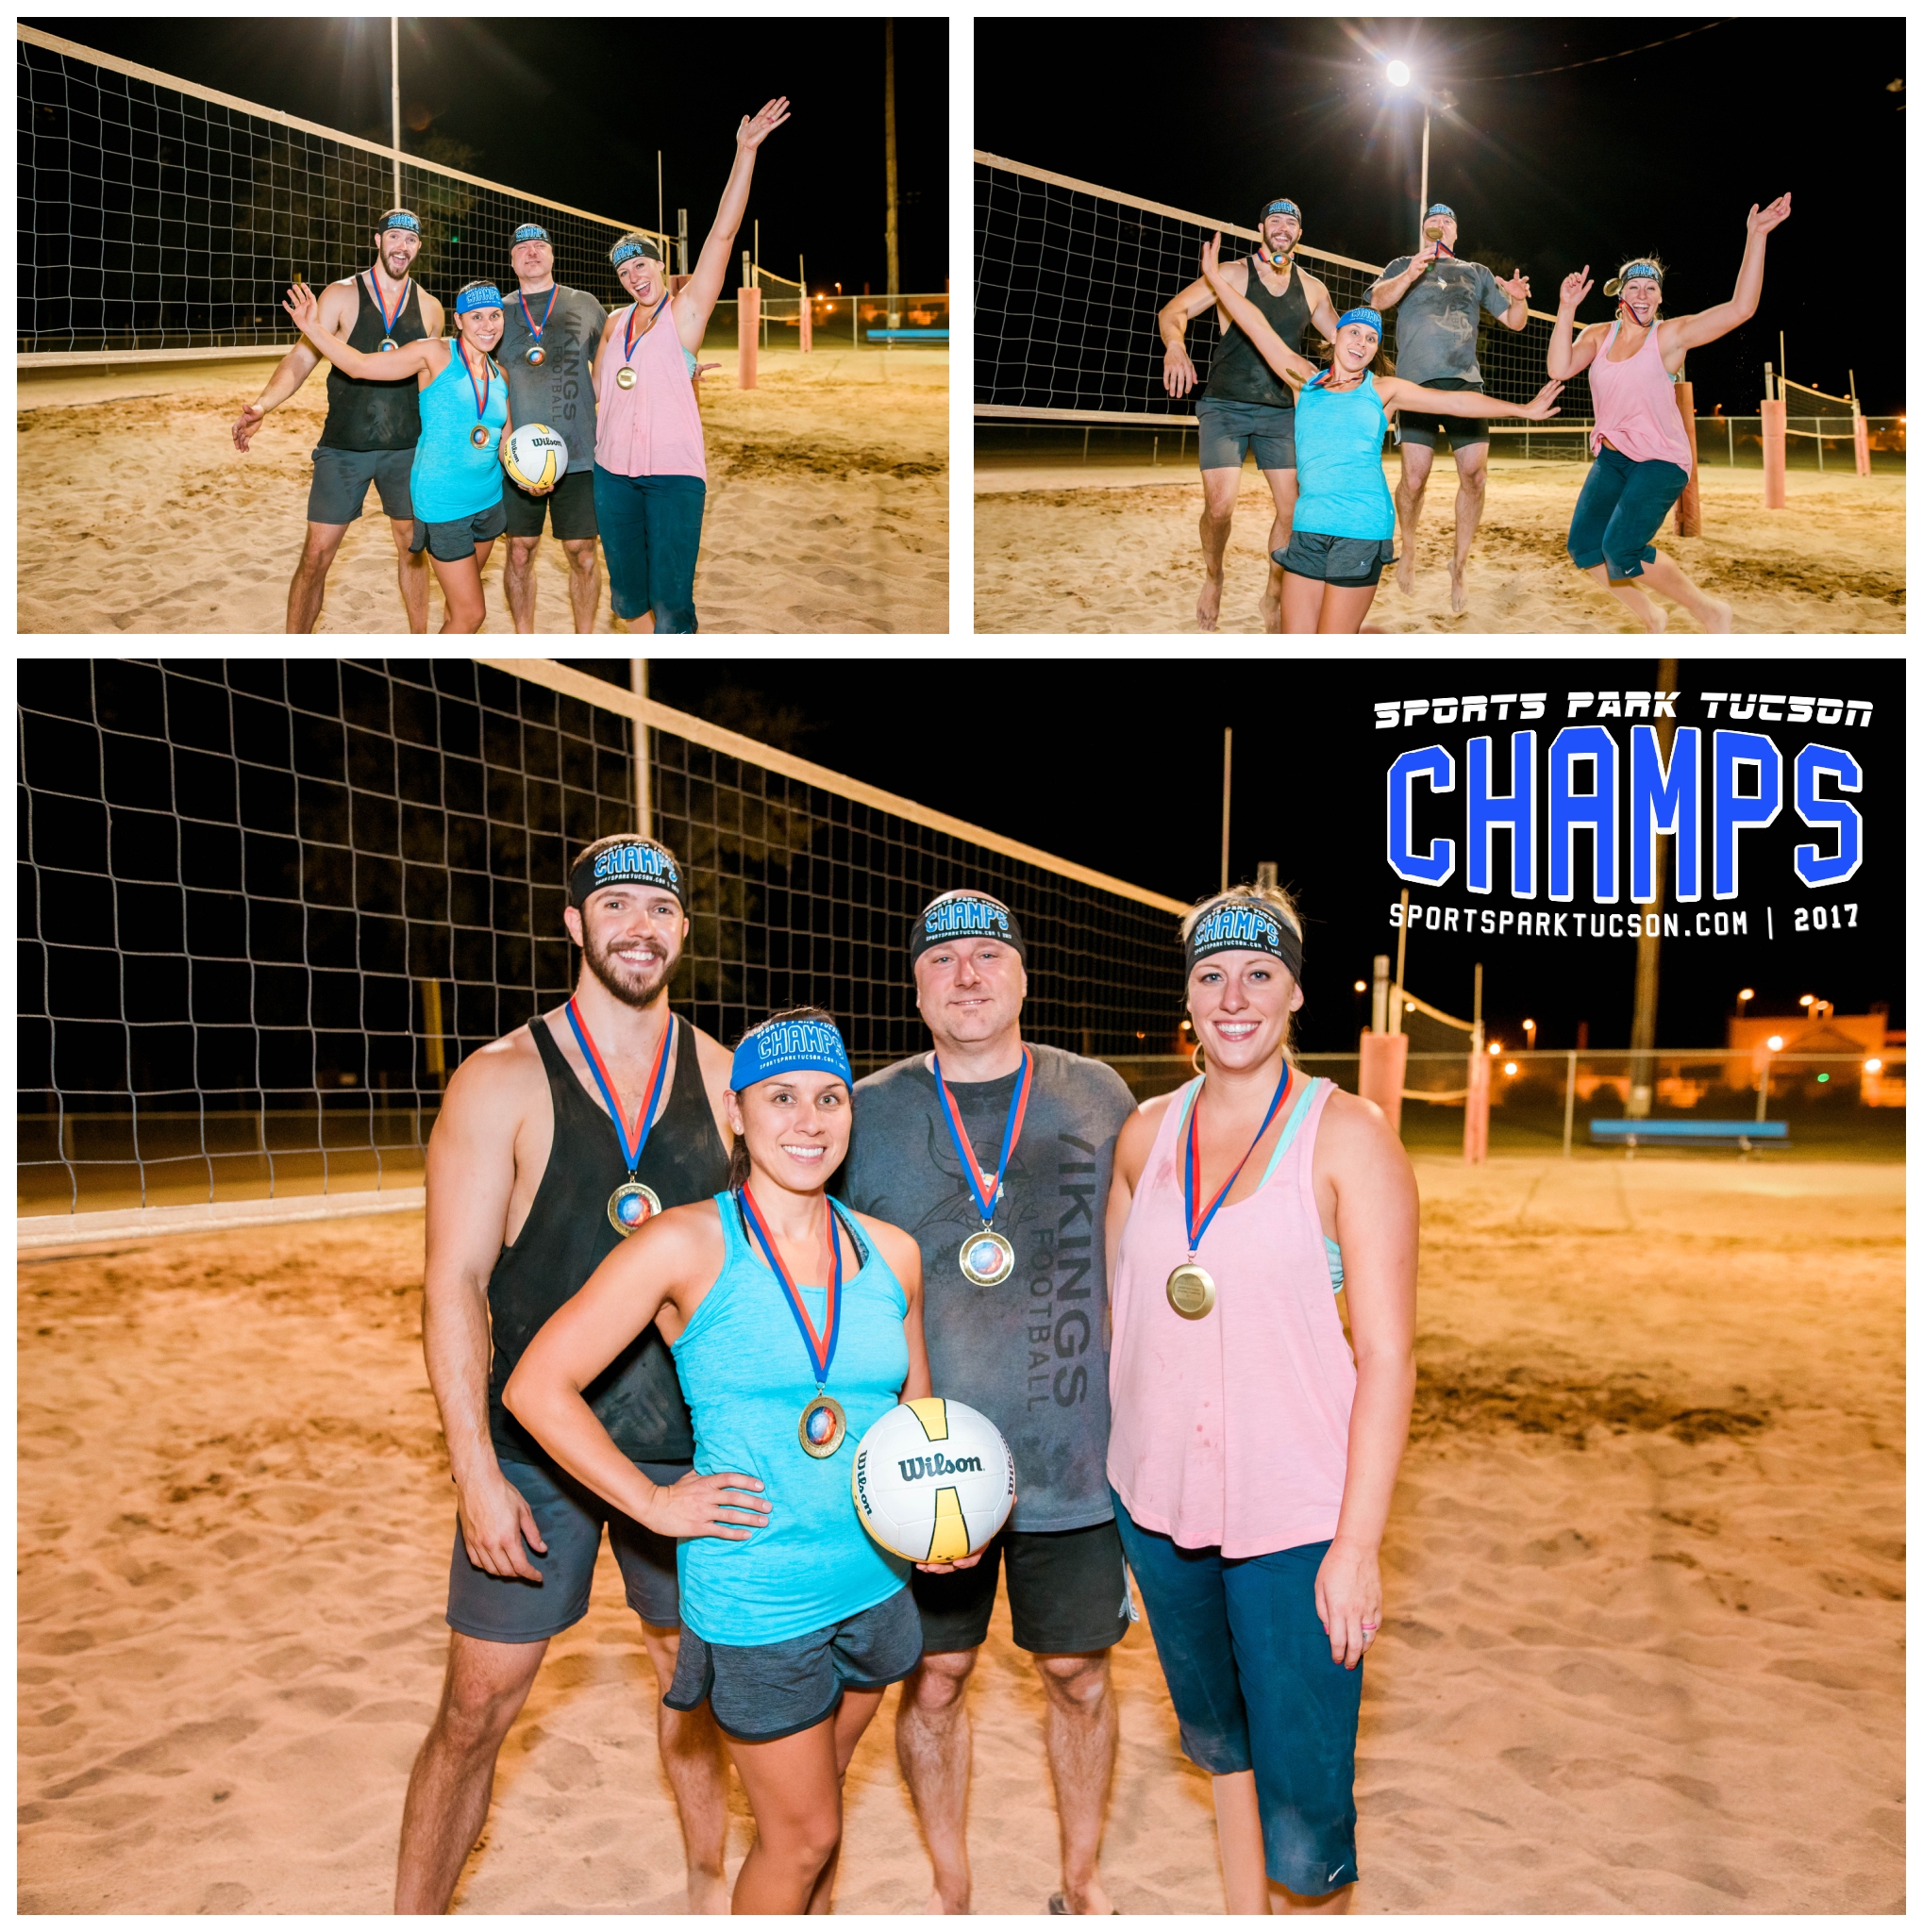 Volleyball Wed Co-ed 4 V 4 - Silver Champions